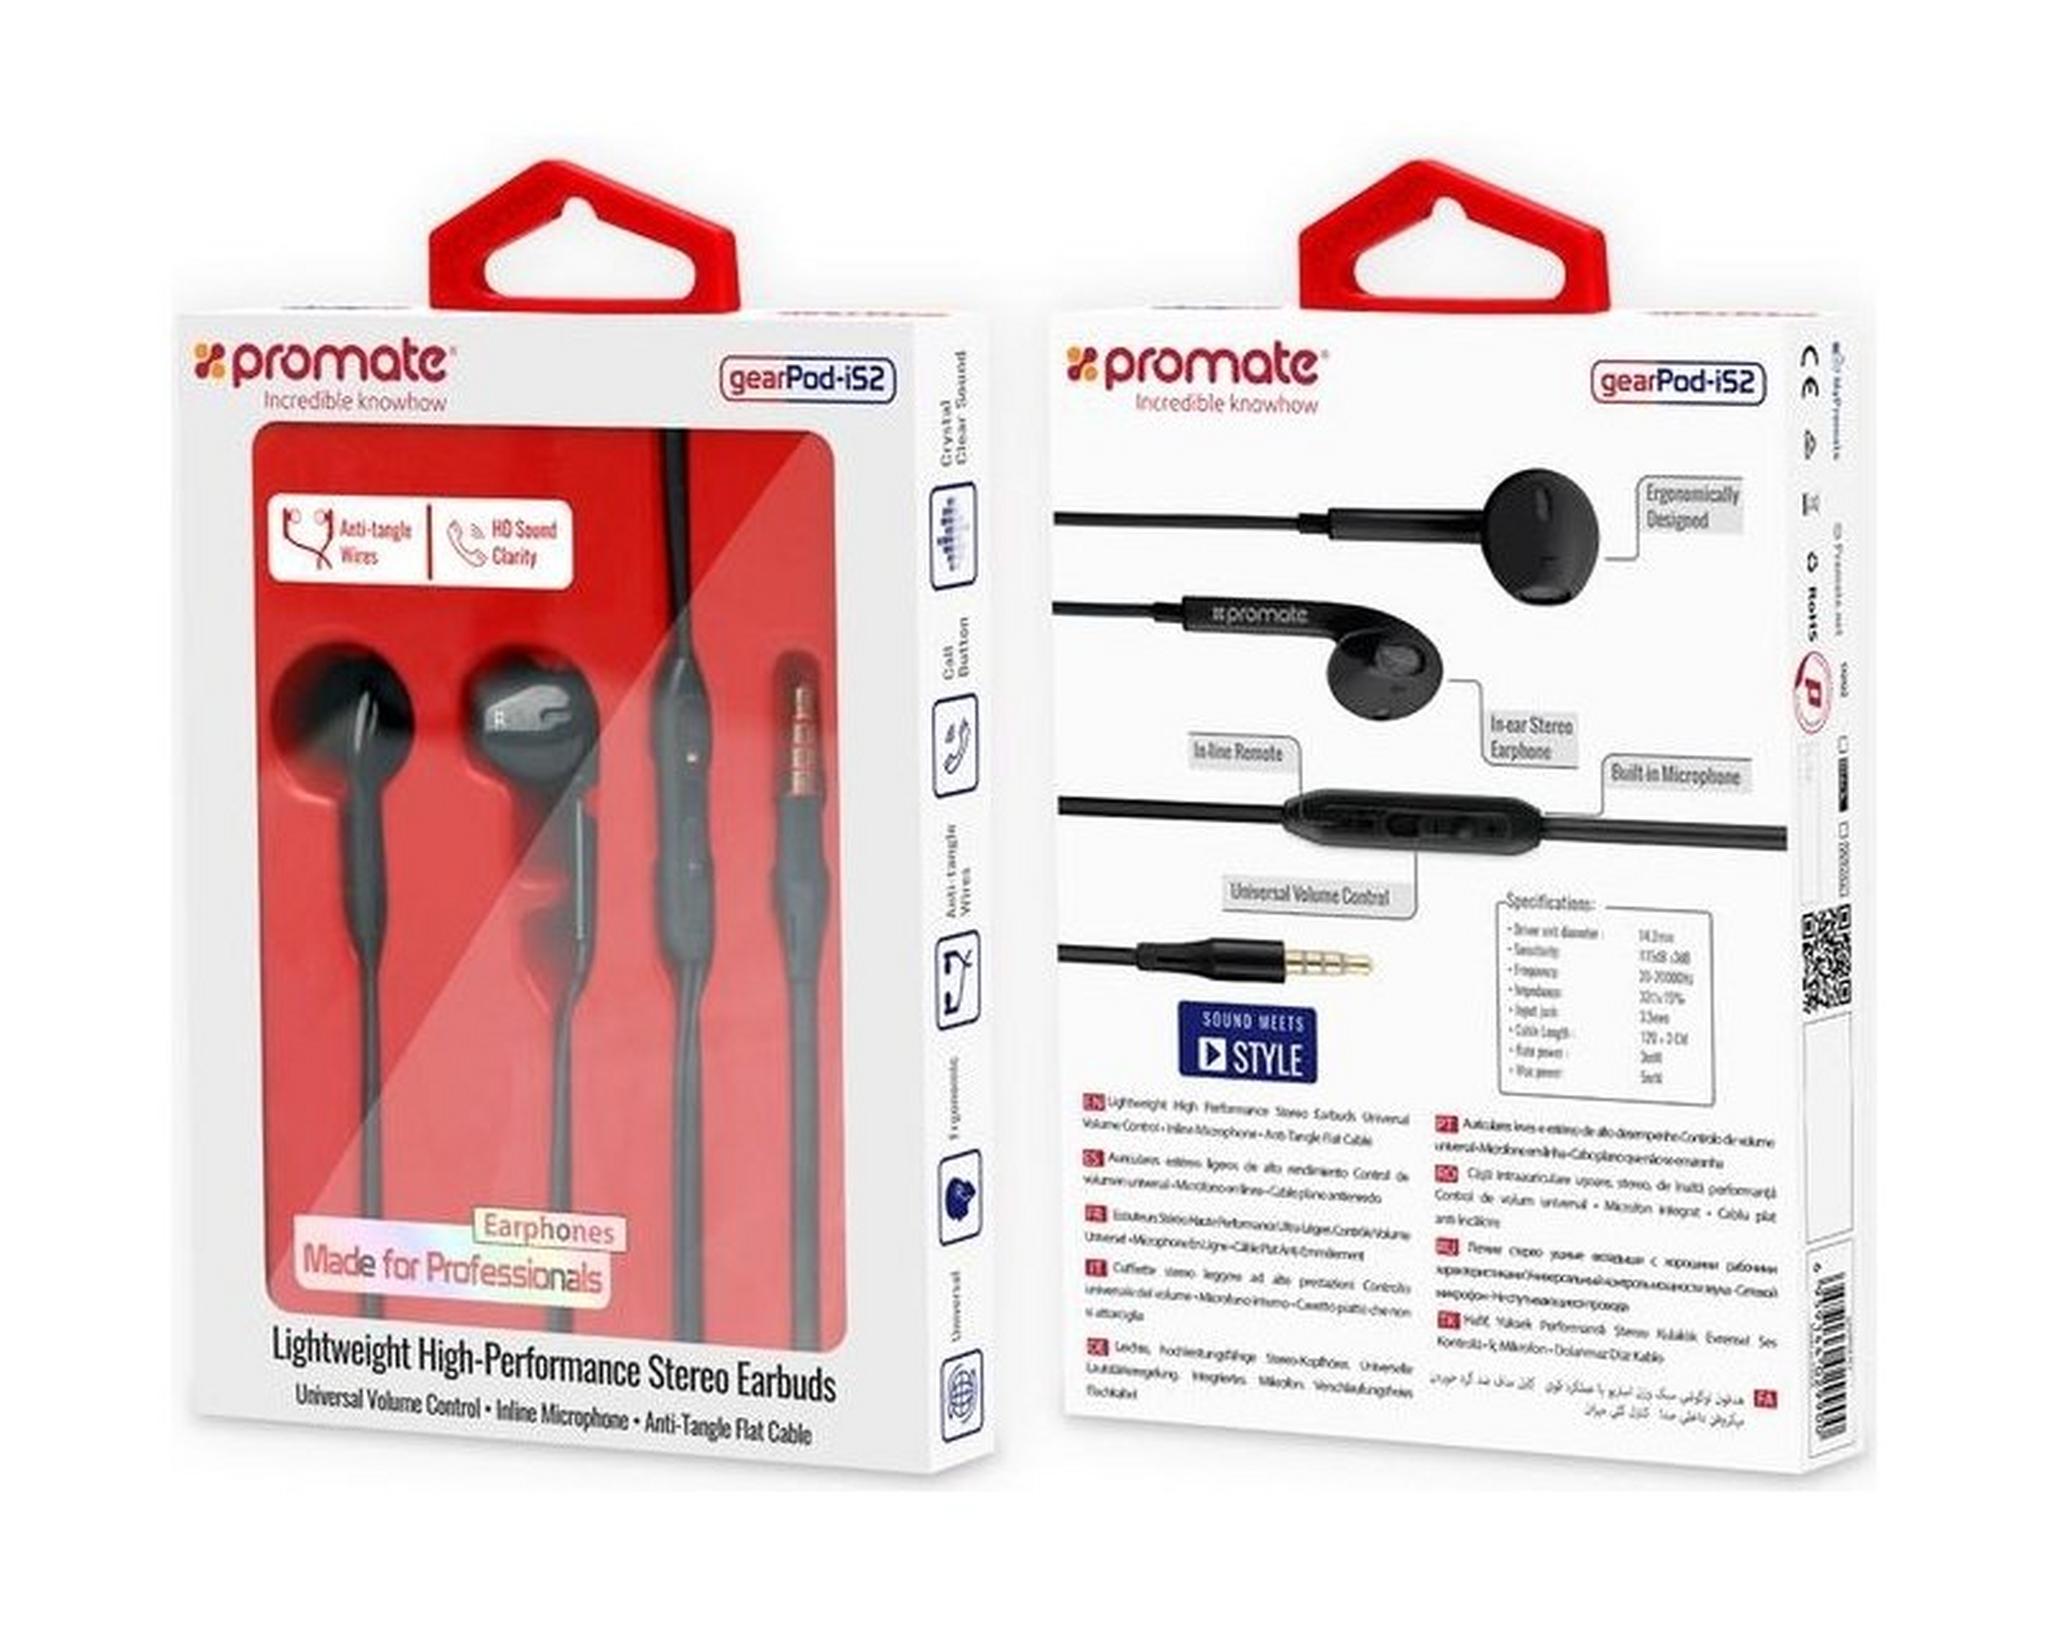 Promate GearPod-IS2 Lightweight High-Performance Stereo Earbuds - Black